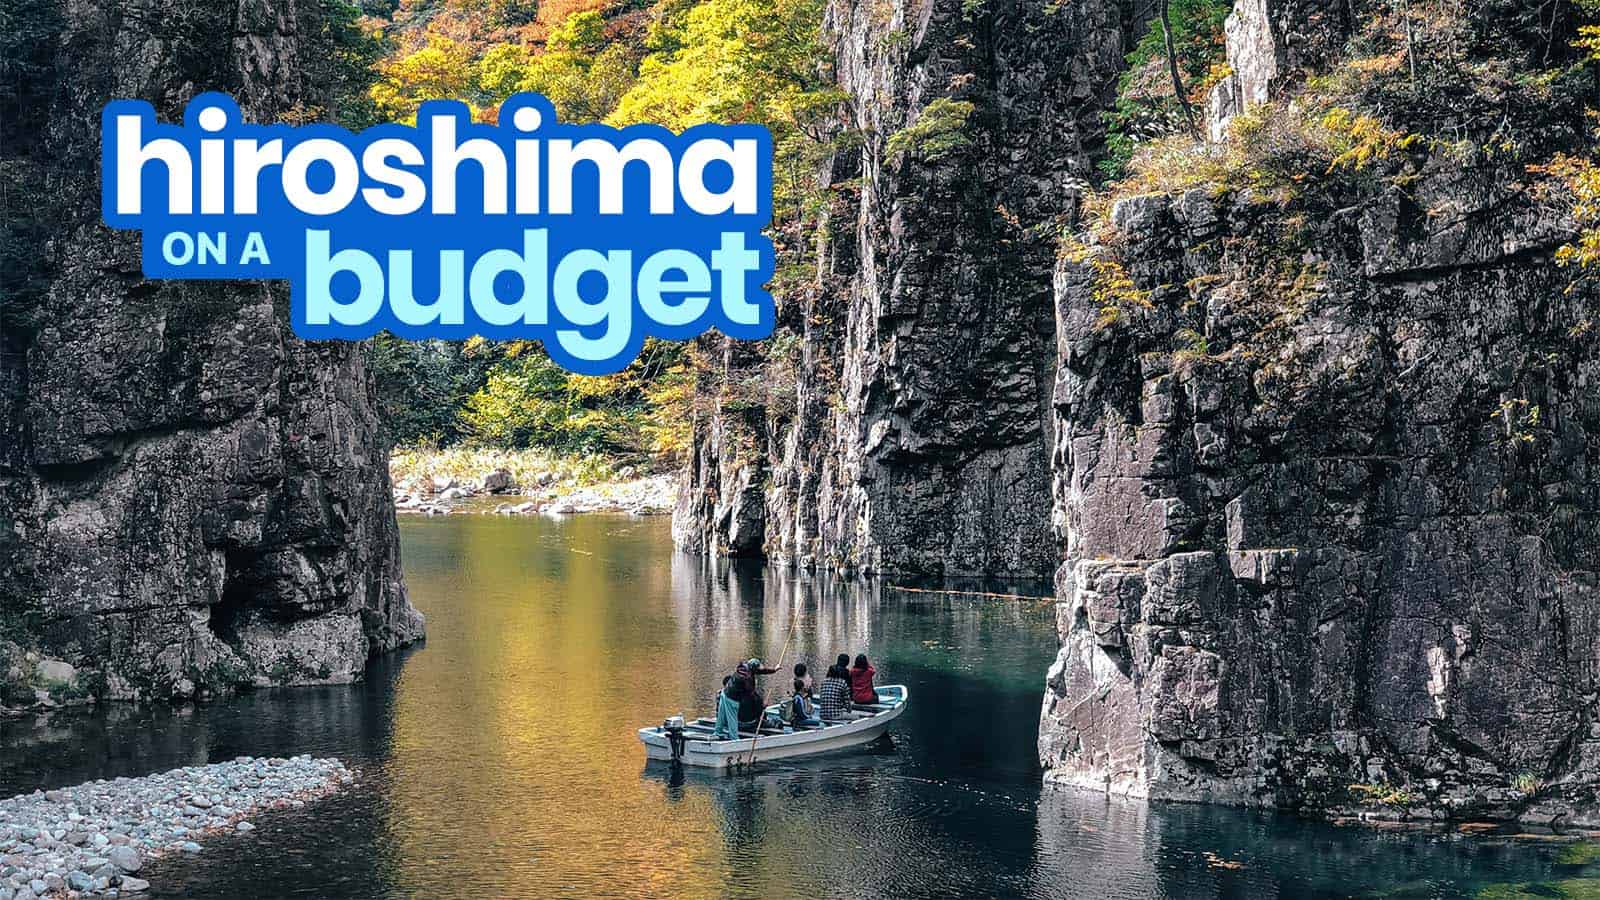 HIROSHIMA TRAVEL GUIDE with Budget Itinerary